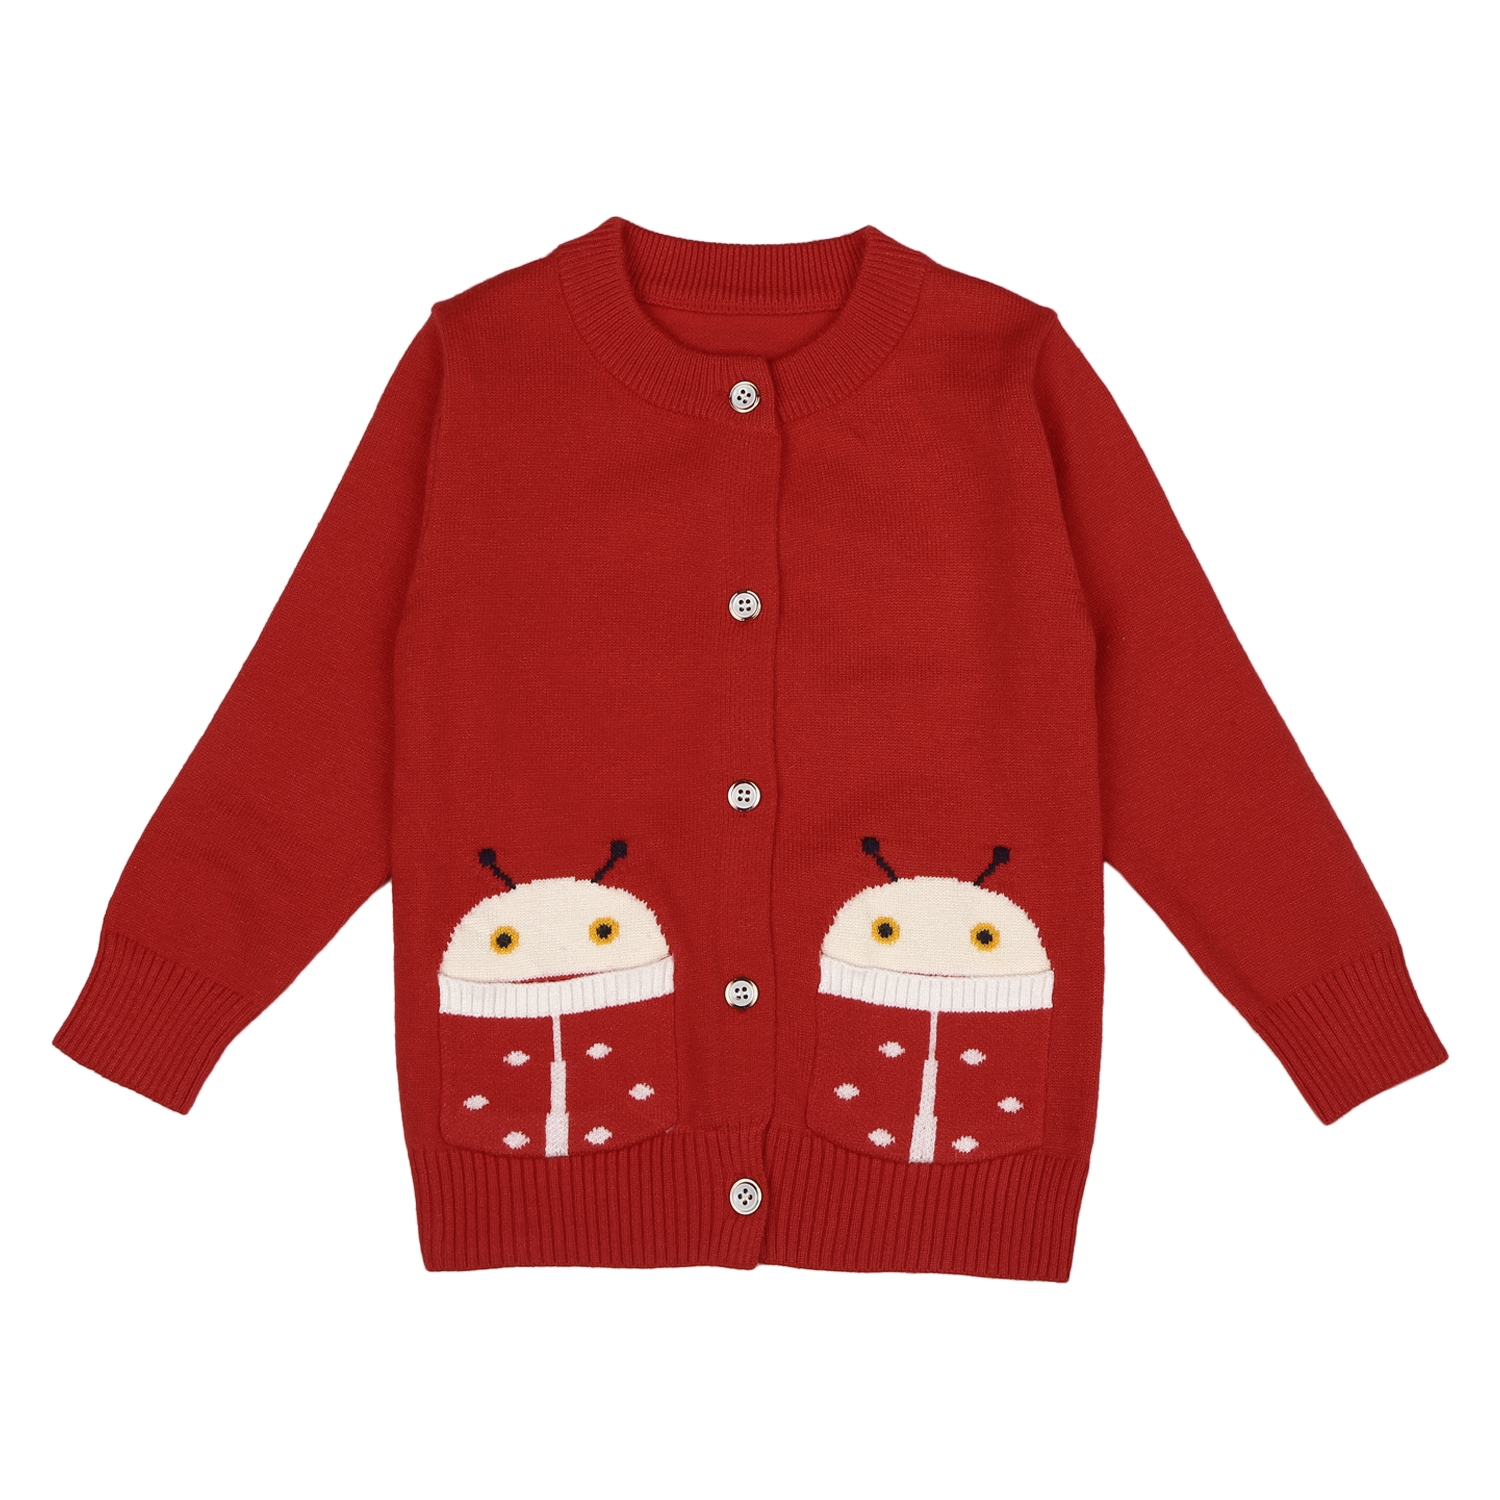 Mothercare | Girls Full sleeves Sweater - Red 0